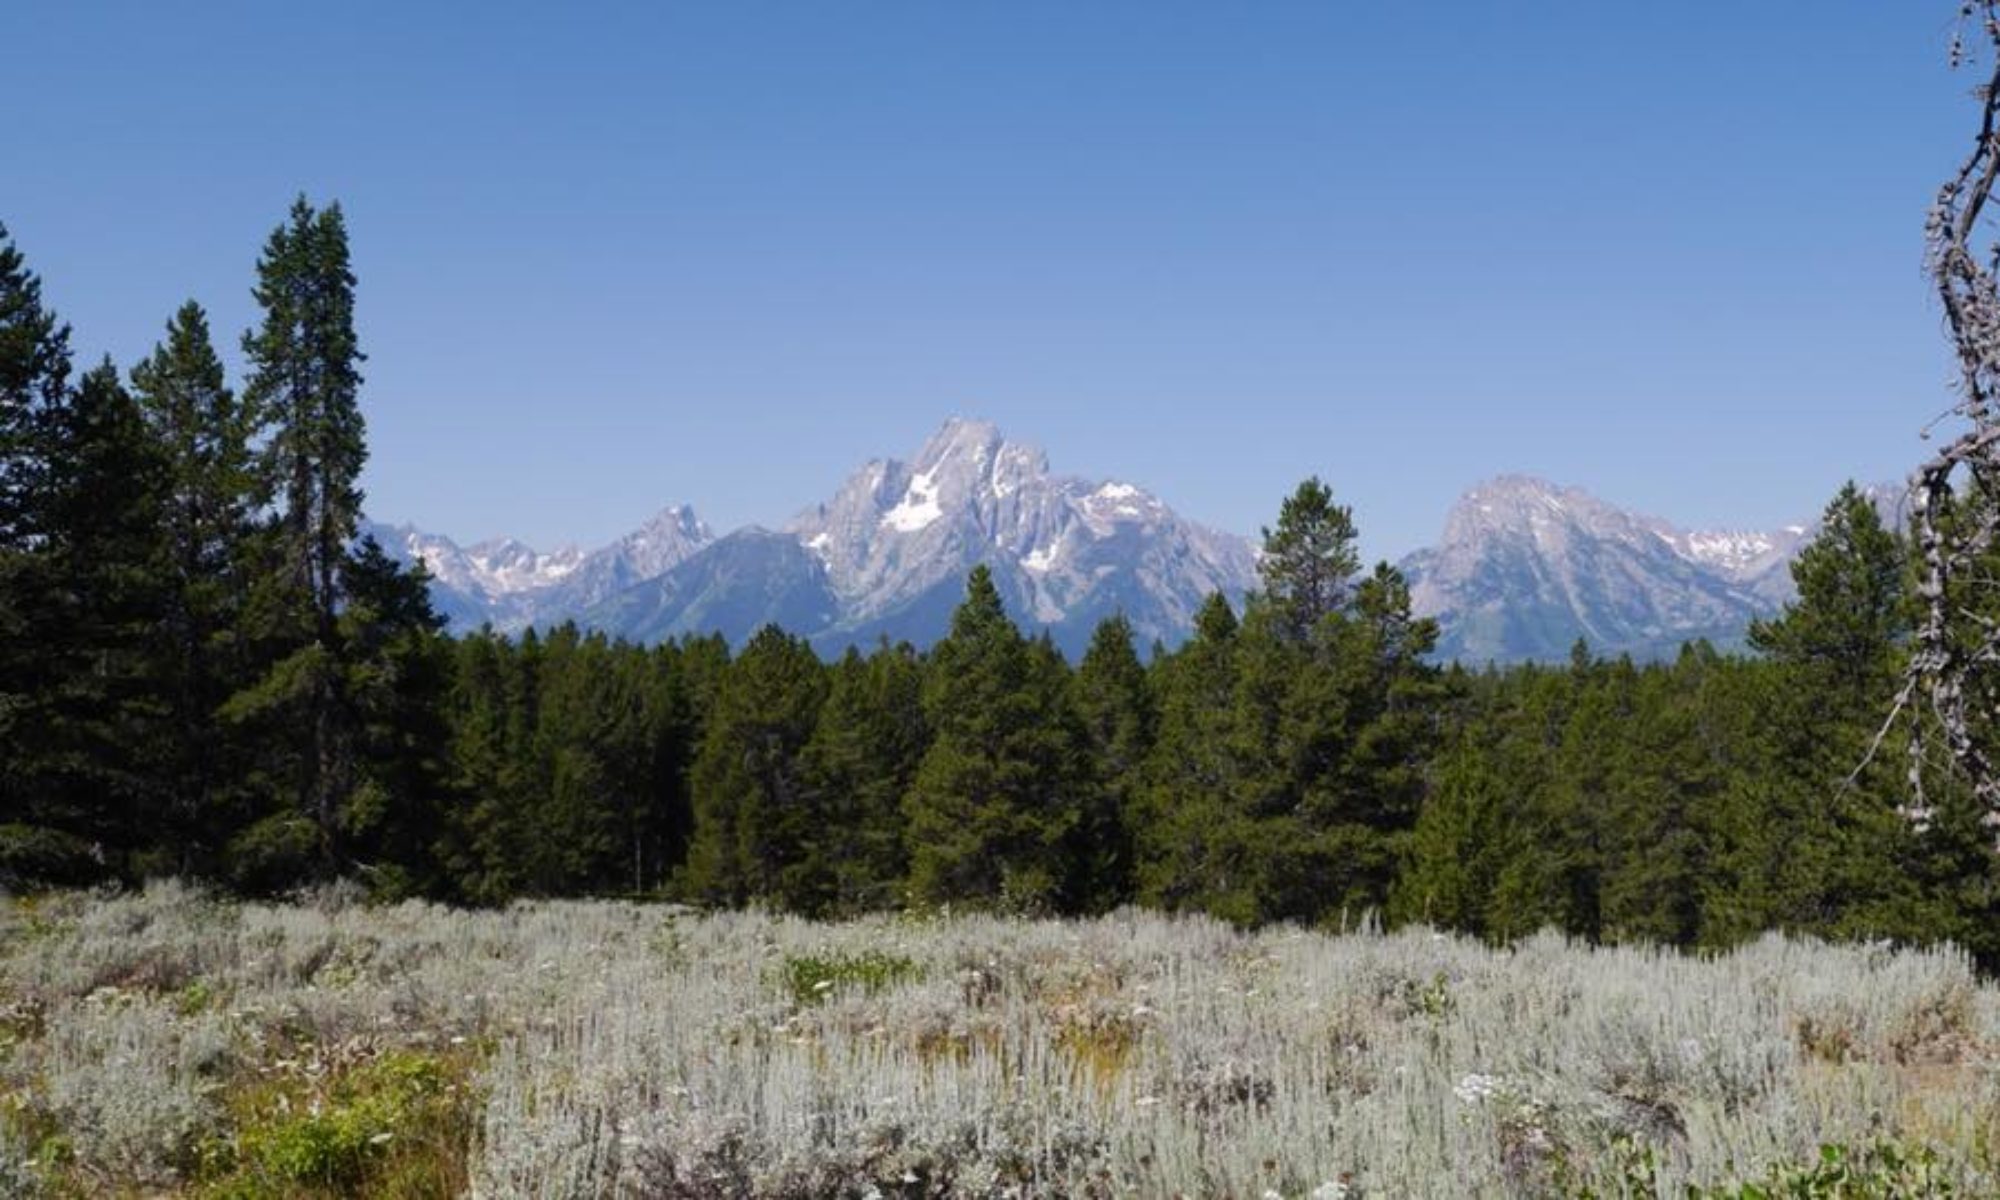 Teton mountain range in background with pine trees and field of wildflowers in foreground.